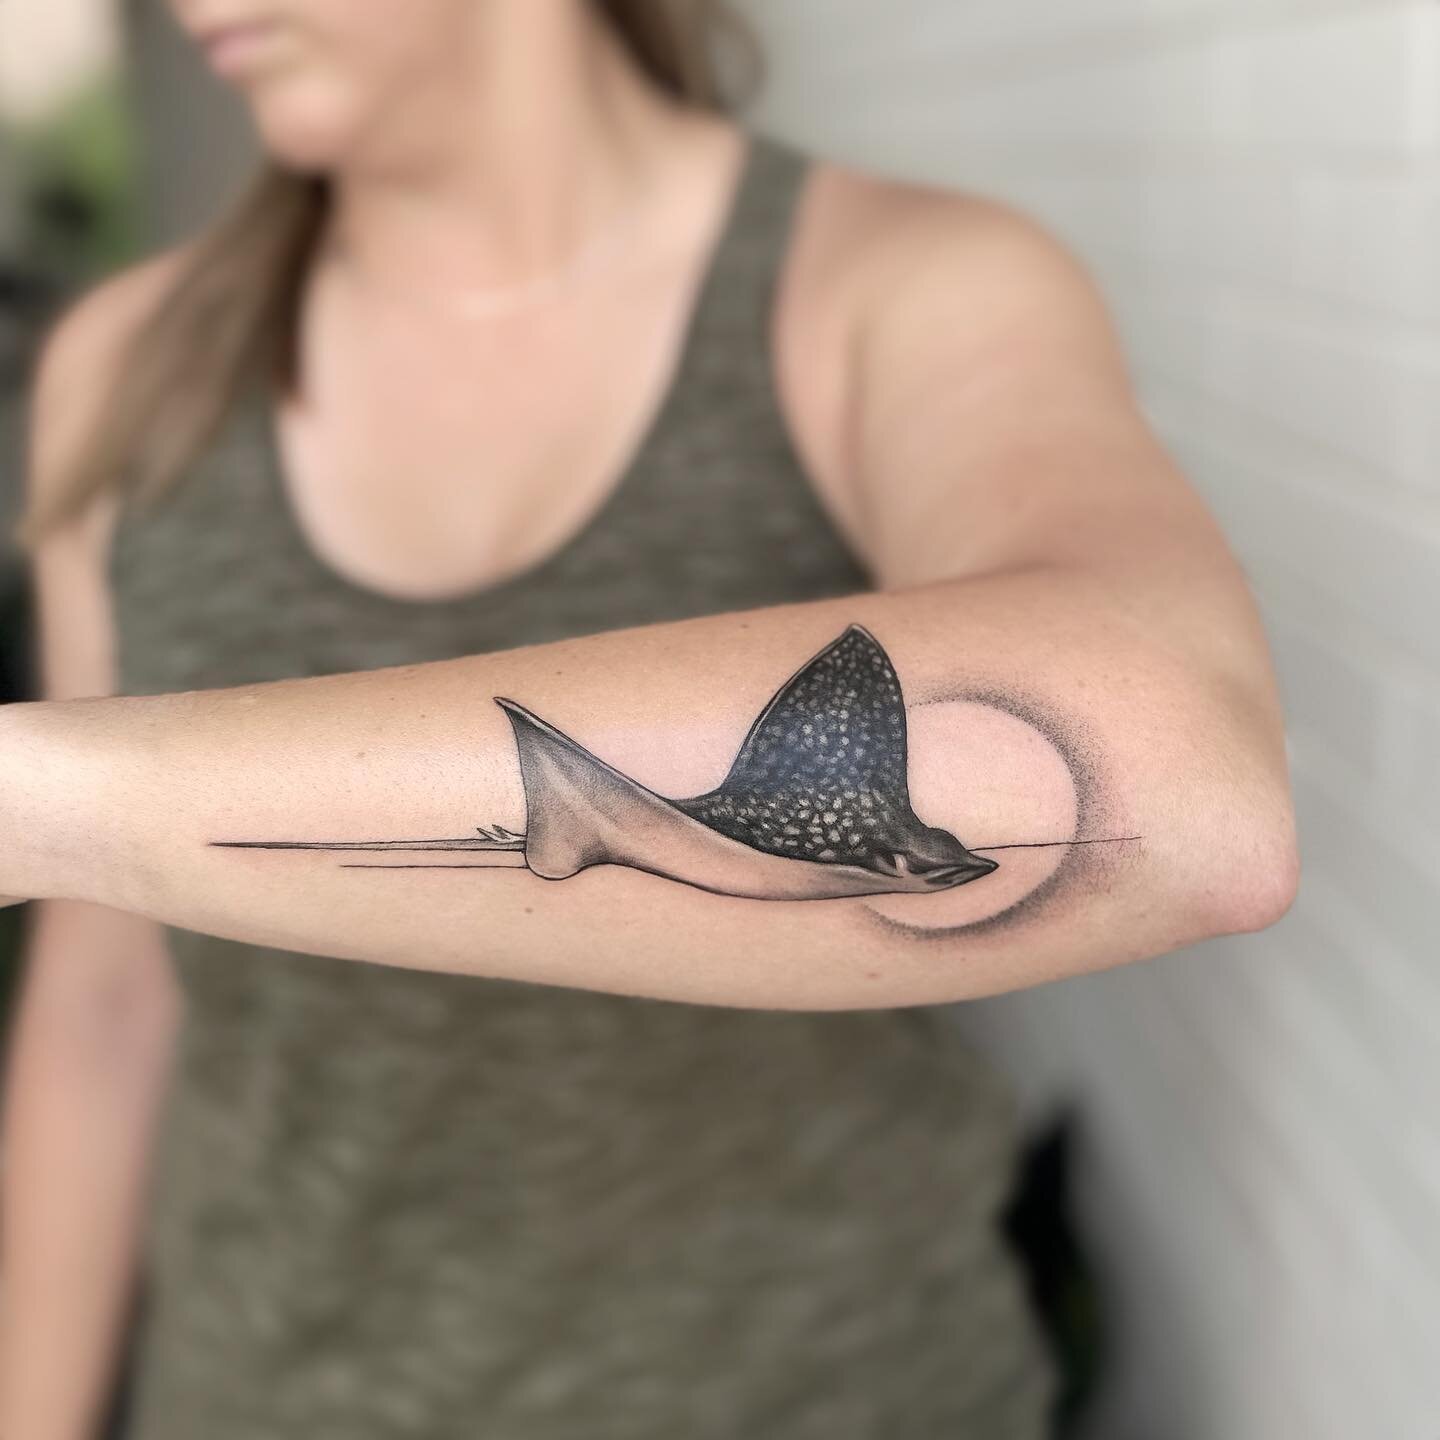 eagle ray for Brittany 🌊
Thank you for trusting me ! 
made at @wa.ink.tattoo 
.
.
.
.
#raytattoo#perthtattoo#perthtattooartists#perthtattooartist